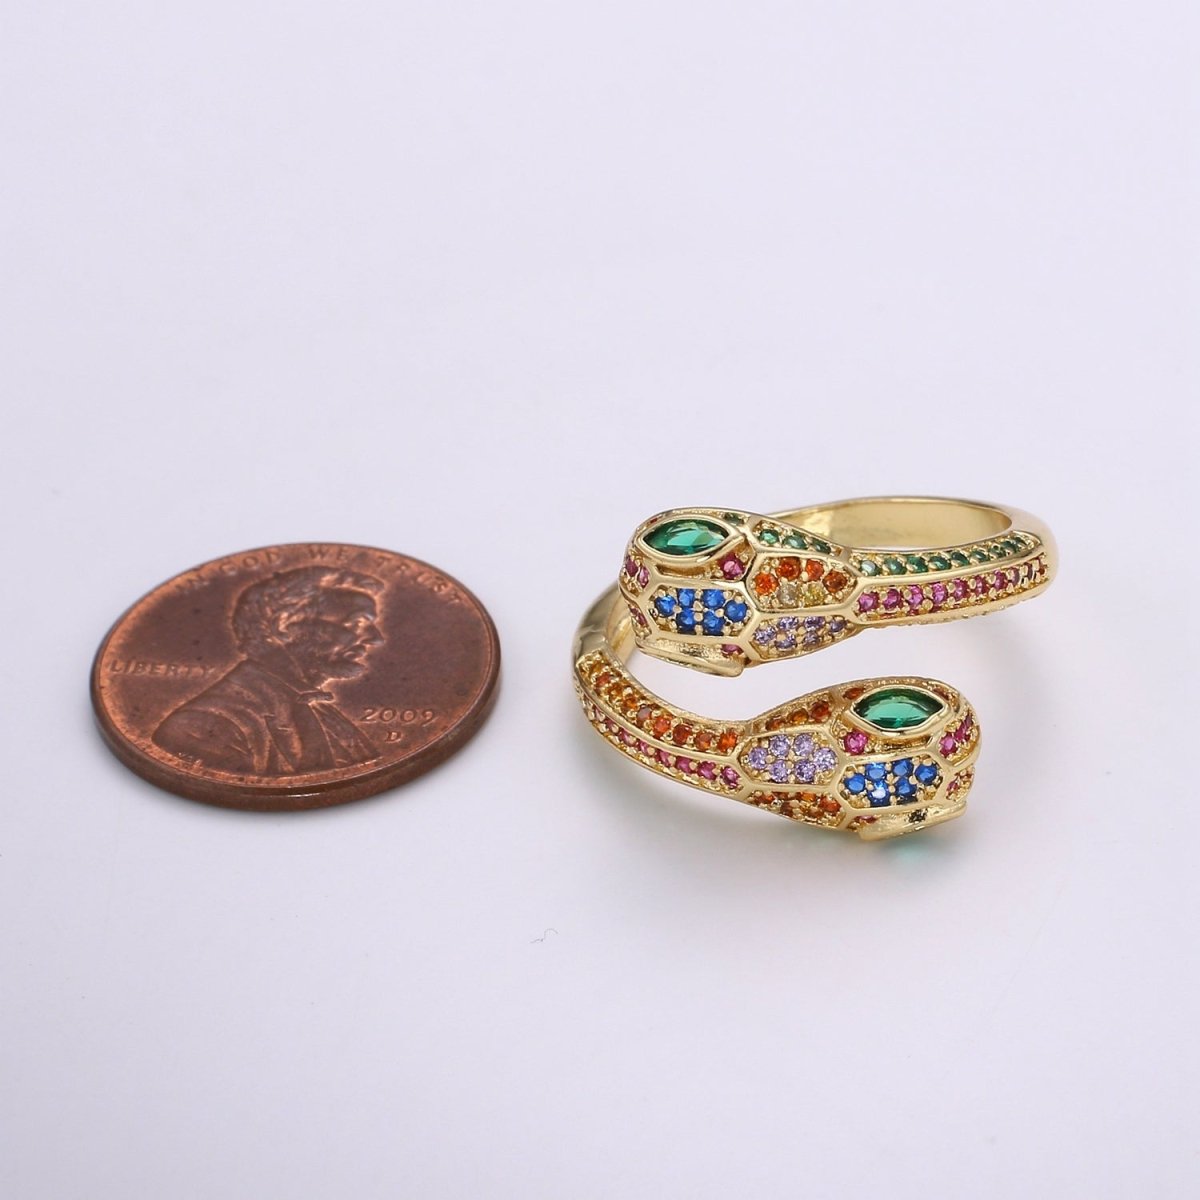 1pc 24k Gold CZ Pave Double Head Snake Ring, Adjustable Gold Snake Ring, Two Heads Serpent Animal Ring, Multi color Stone DIY Jewelry R313 - DLUXCA